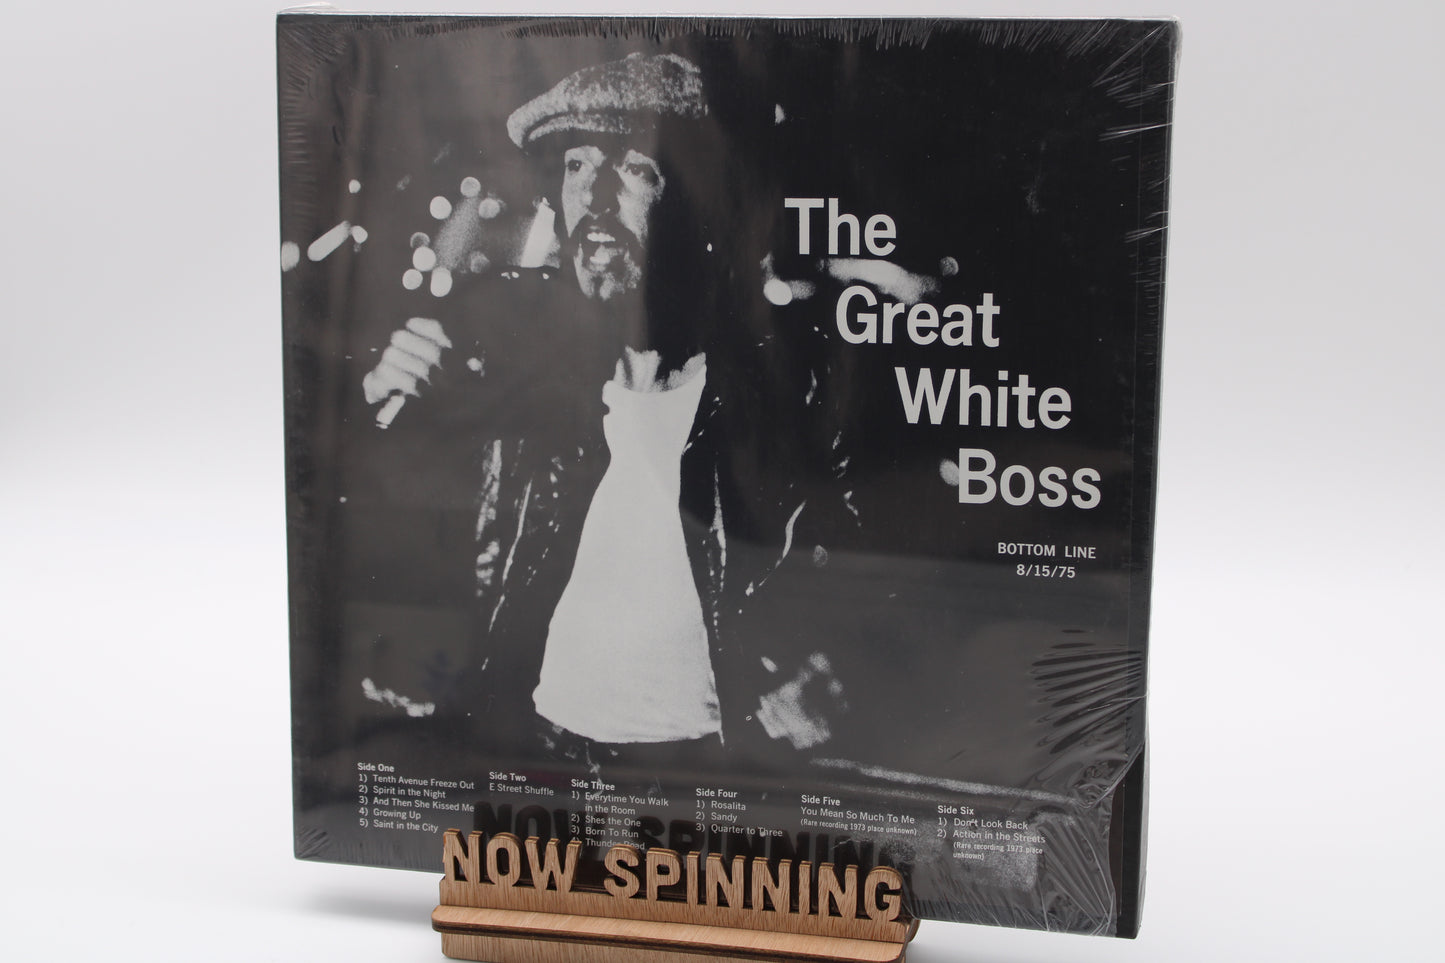 Bruce Springsteen - SEALED - The Great White Boss - Live at The Bottom Line in NYC 1975 - Vinyl 3 LPs - Box Set - BLV